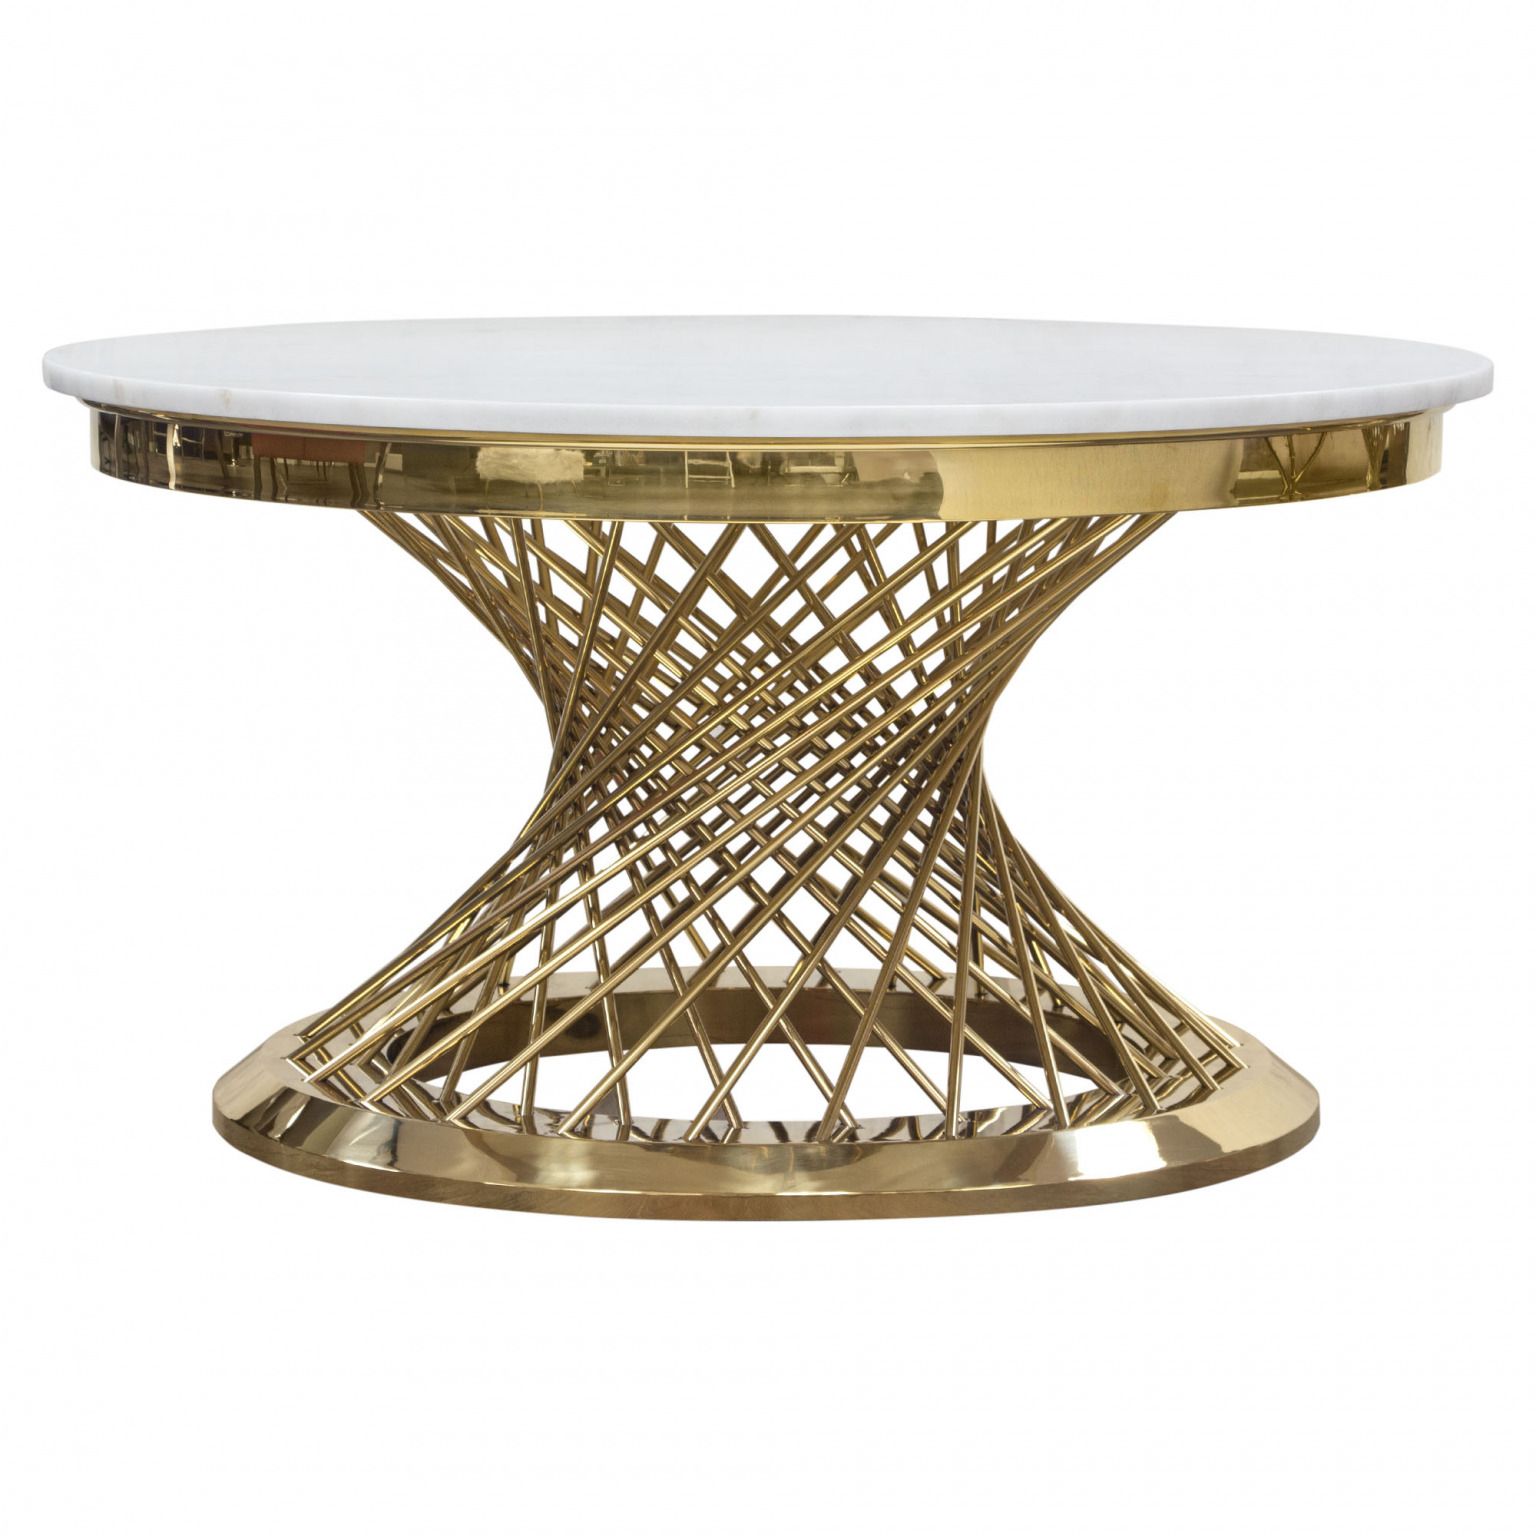 Solstice 35" Round Cocktail Table With Genuine Marble Top Intended For Polished Chrome Round Cocktail Tables (View 4 of 15)